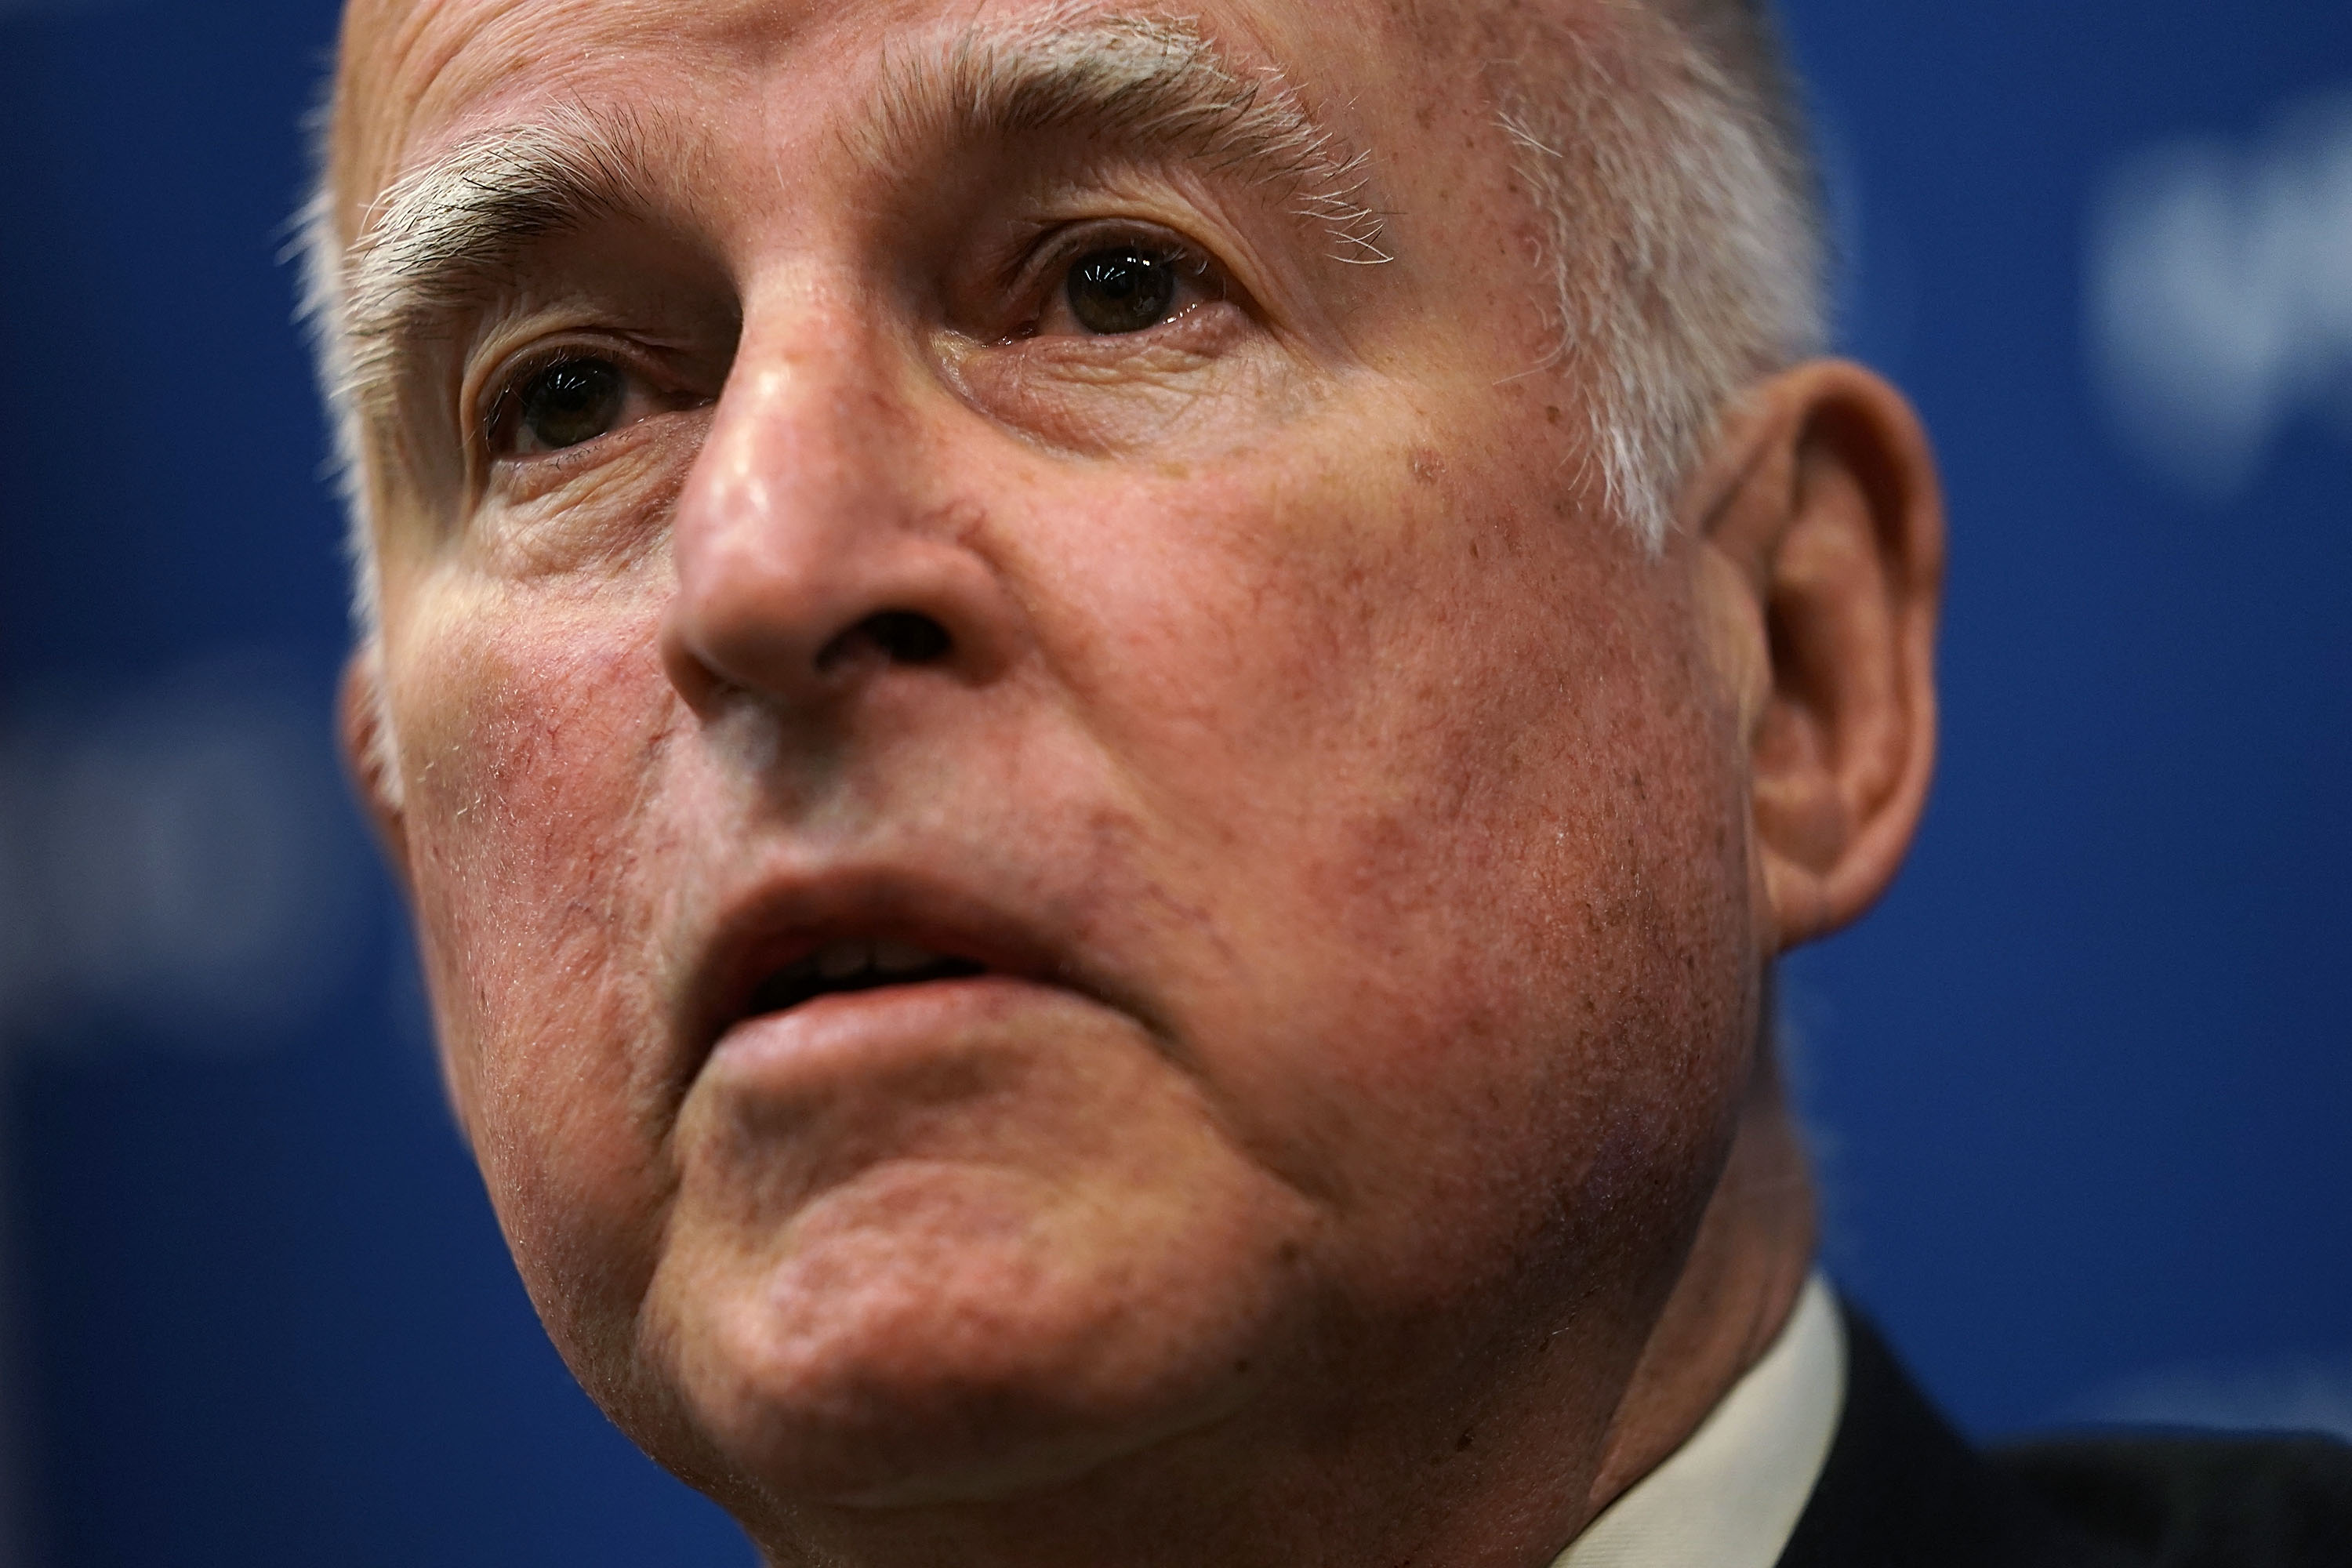 WASHINGTON, DC - APRIL 17:  Gov. Jerry Brown (D-CA) speaks during an event at the National Press Club April 17, 2018 in Washington, DC. Gov. Brown participated in a National Press Club Newsmaker Program to answer questions from members of the media.  (Photo by Alex Wong/Getty Images) (Alex Wong&mdash;Getty Images)